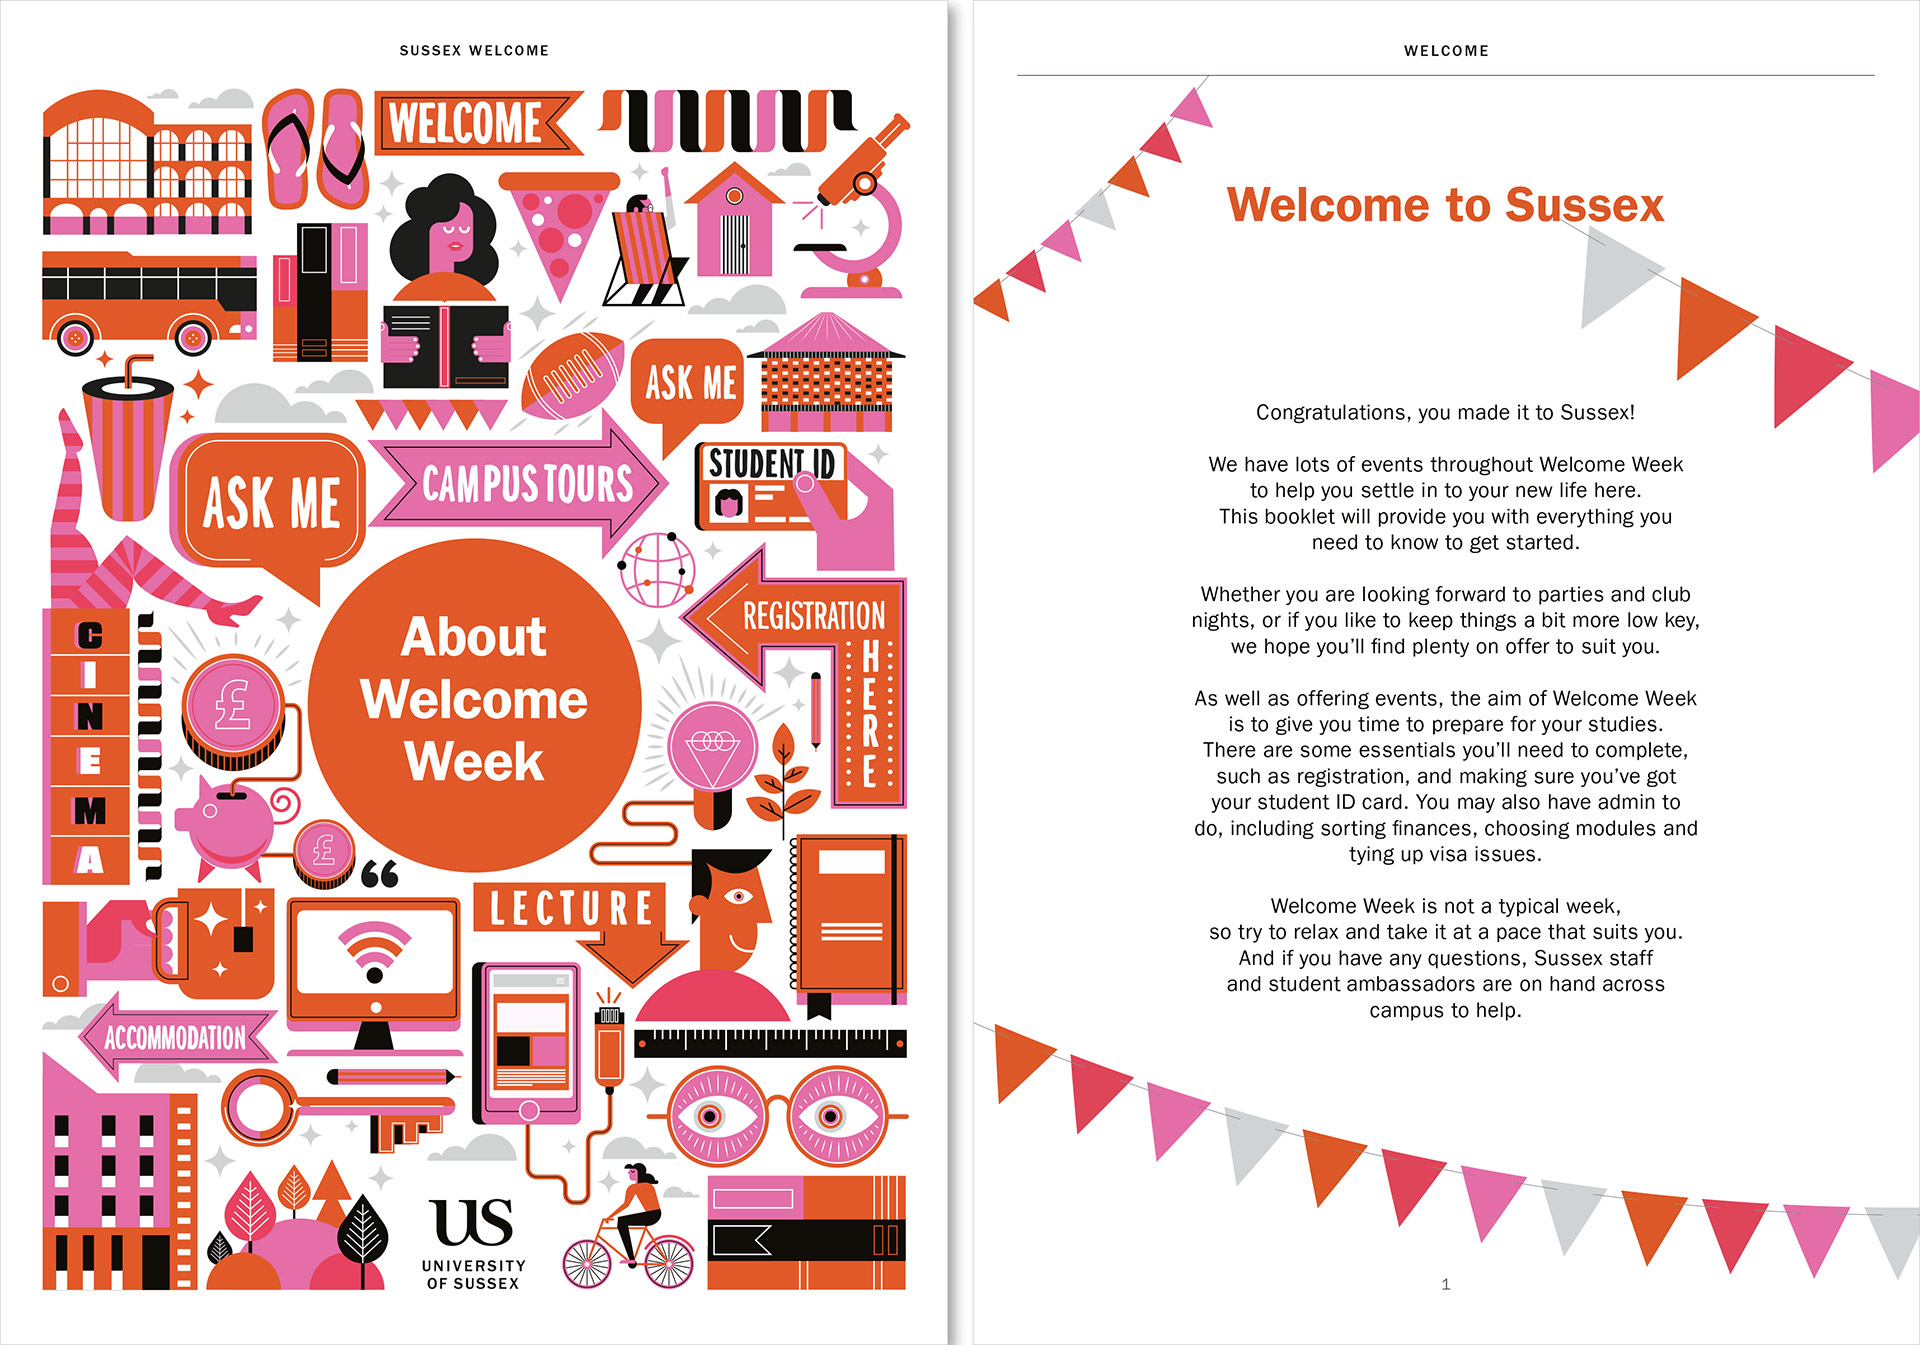 The University of Sussex welcome booklet designed by Irish Butcher